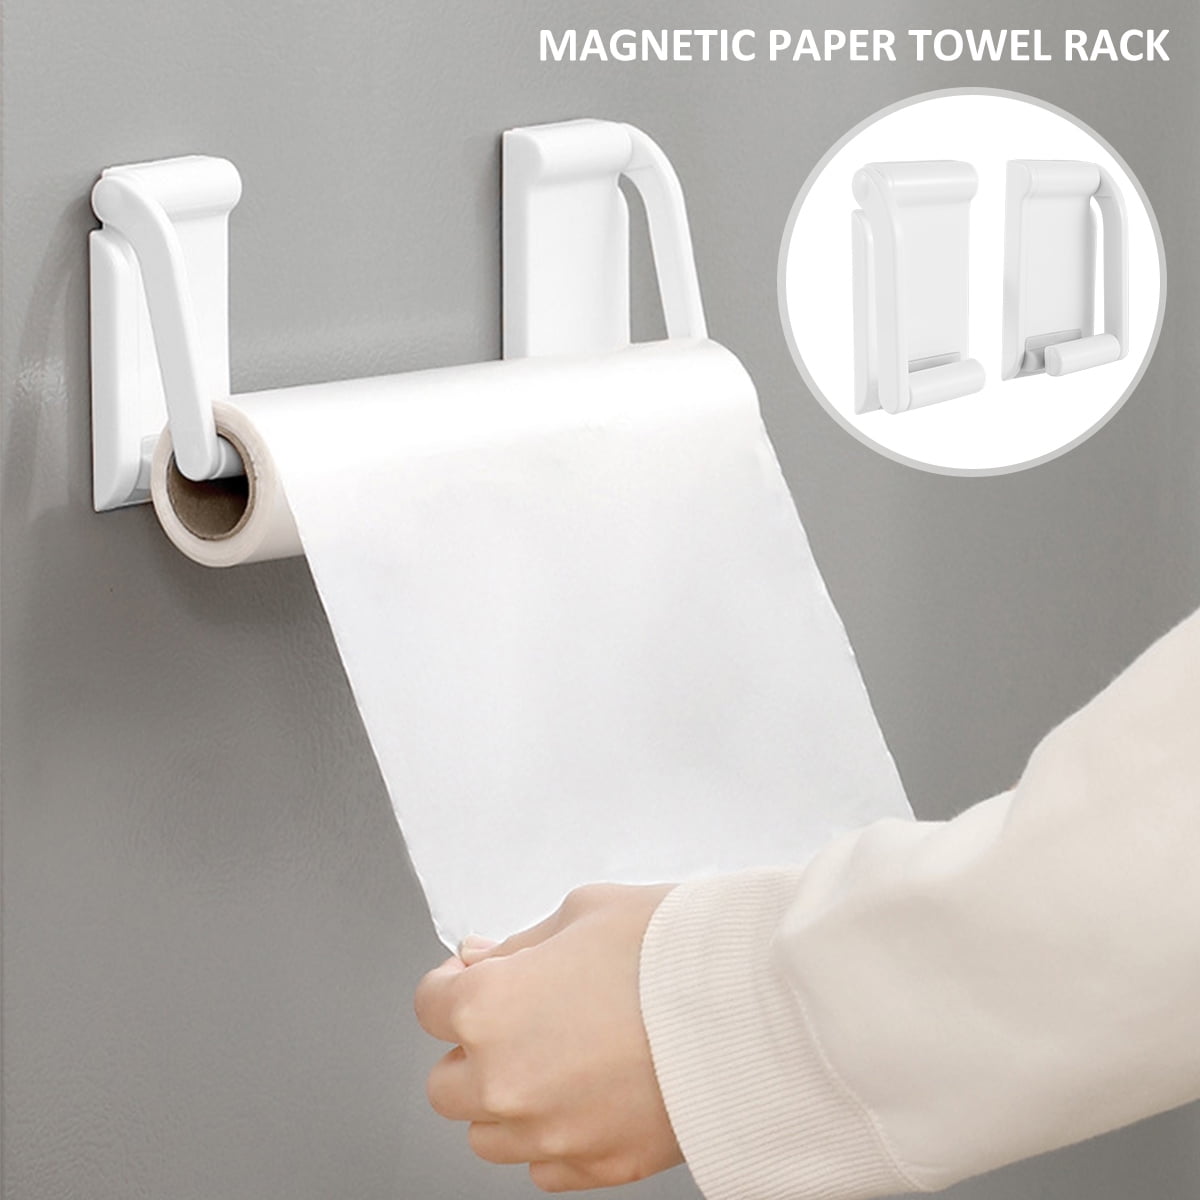 VIAV Outlets 2 PCS Magnetic Paper Towel Holder Bar Strong Magnet Backing  Paper Towel Holder Fit for Small Large Paper Towels Multifunctional Use as